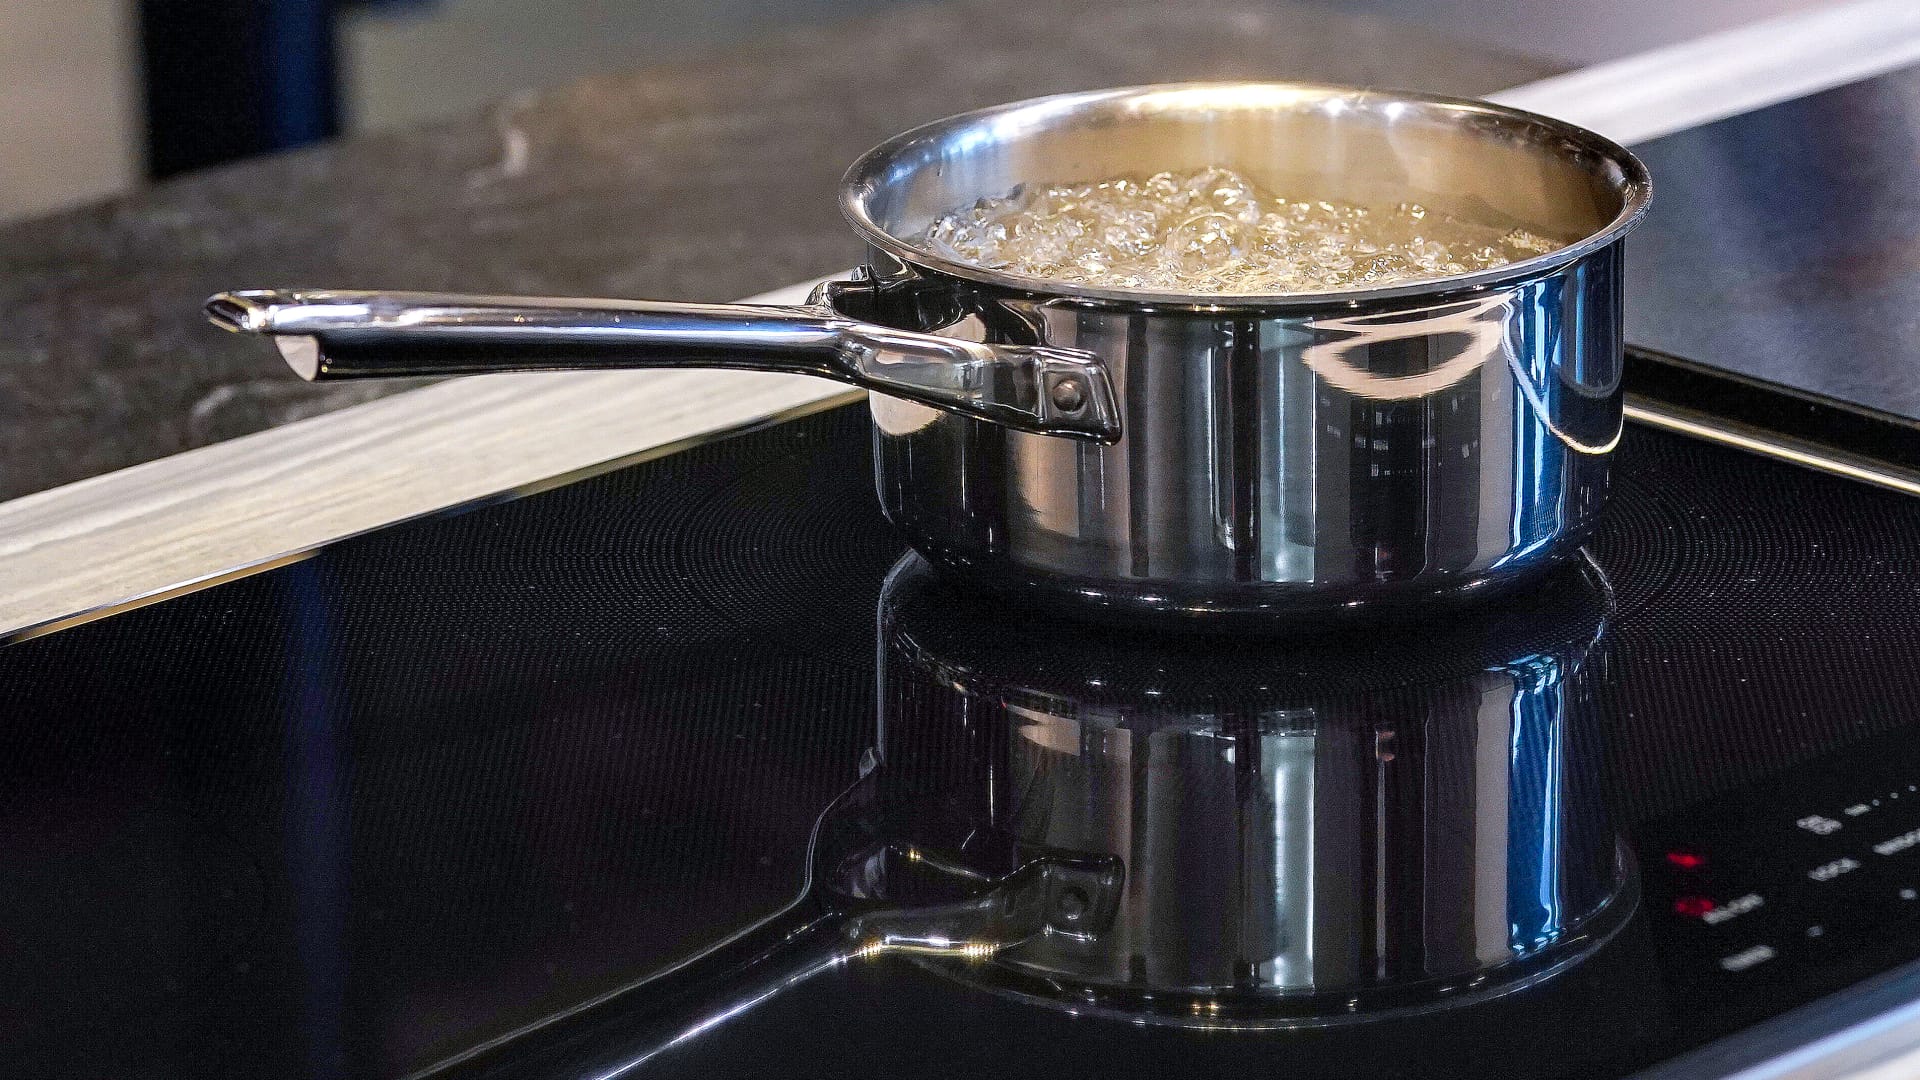 Gas vs. Electric vs. Induction Ranges/Cooktops